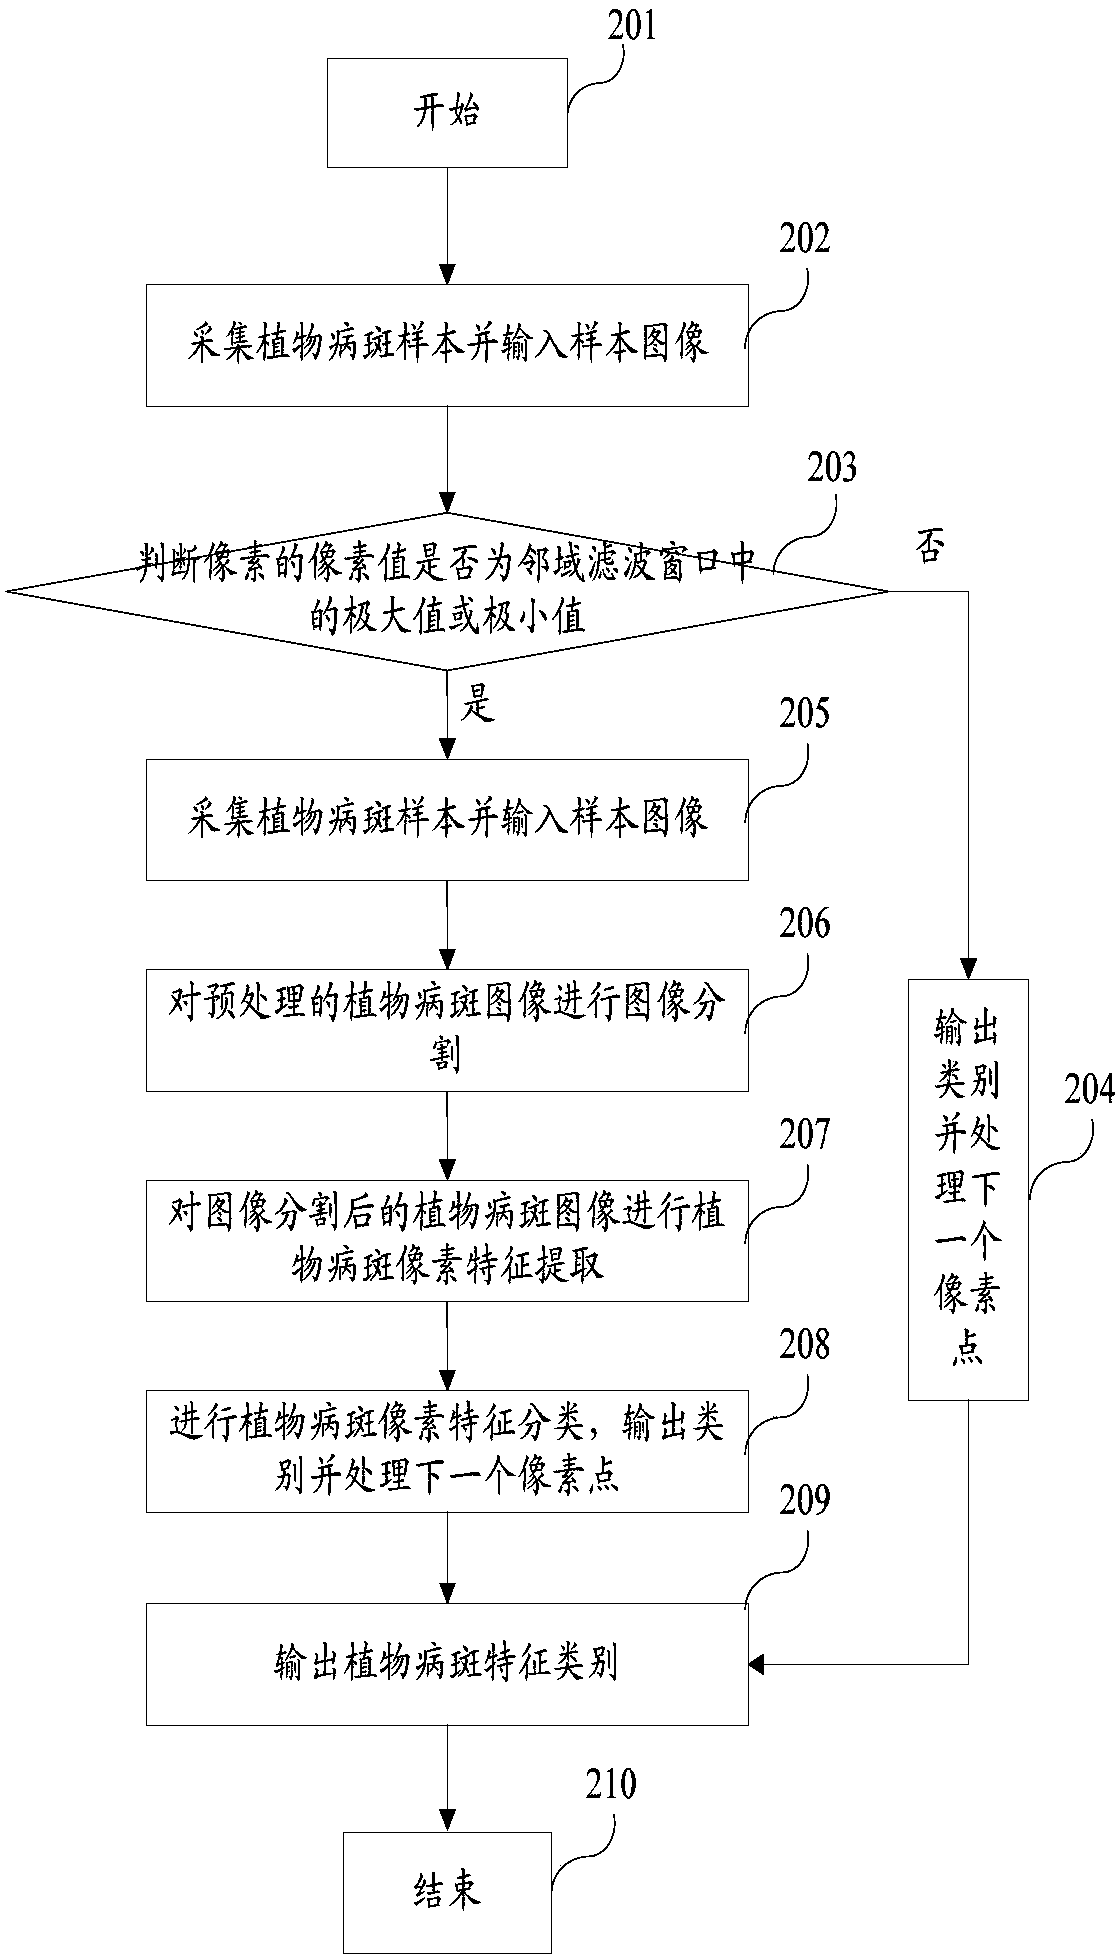 Method and system for performing plant lesion classification based on computer vision